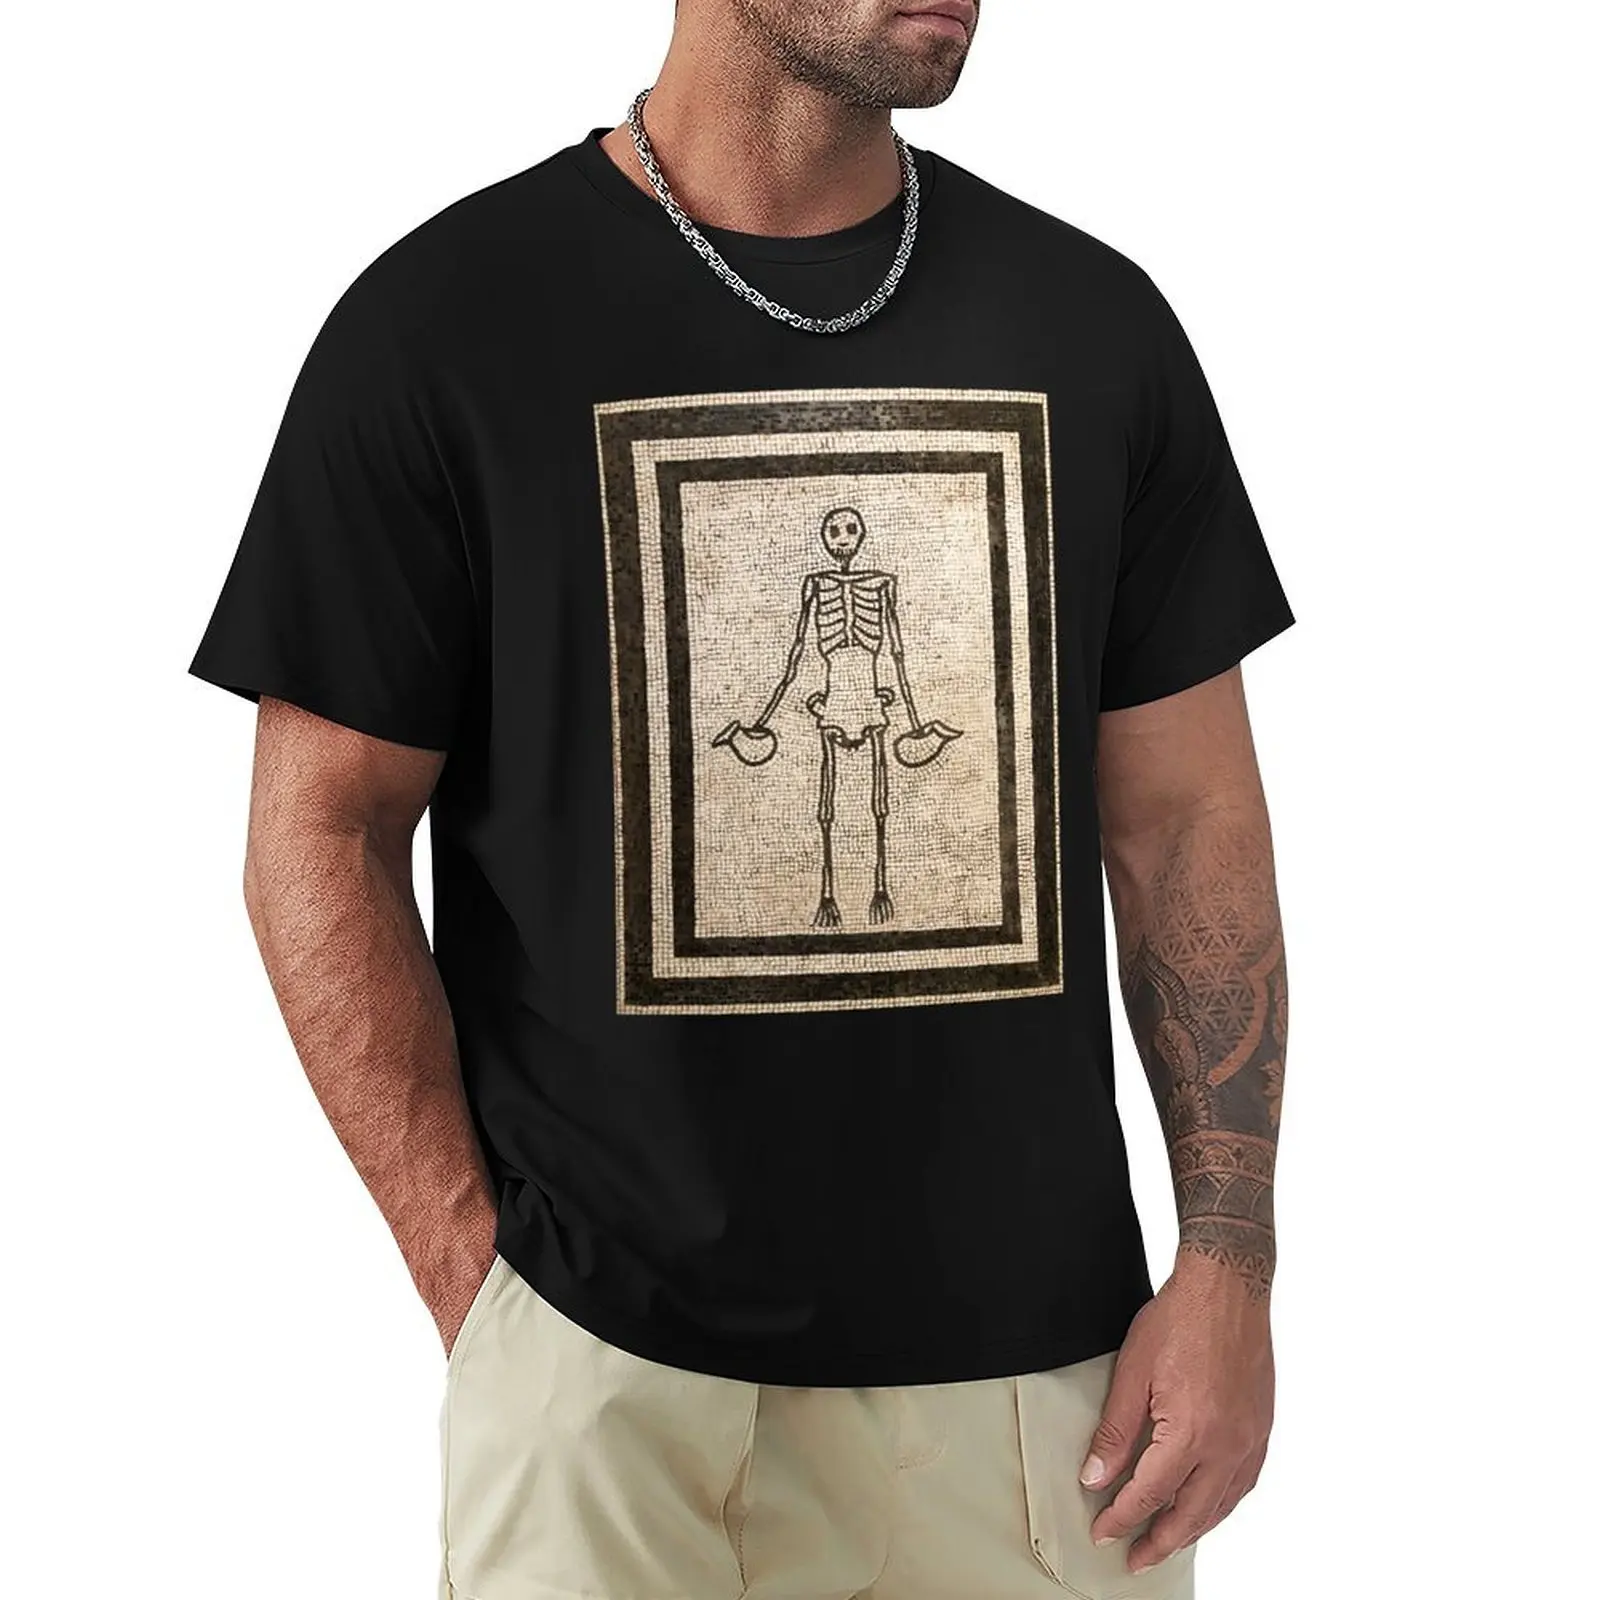 

Roman mosaic from Pompeii showing a grinning skeleton holding wine jugs T-shirt Aesthetic clothing Blouse cute tops T-shirt men